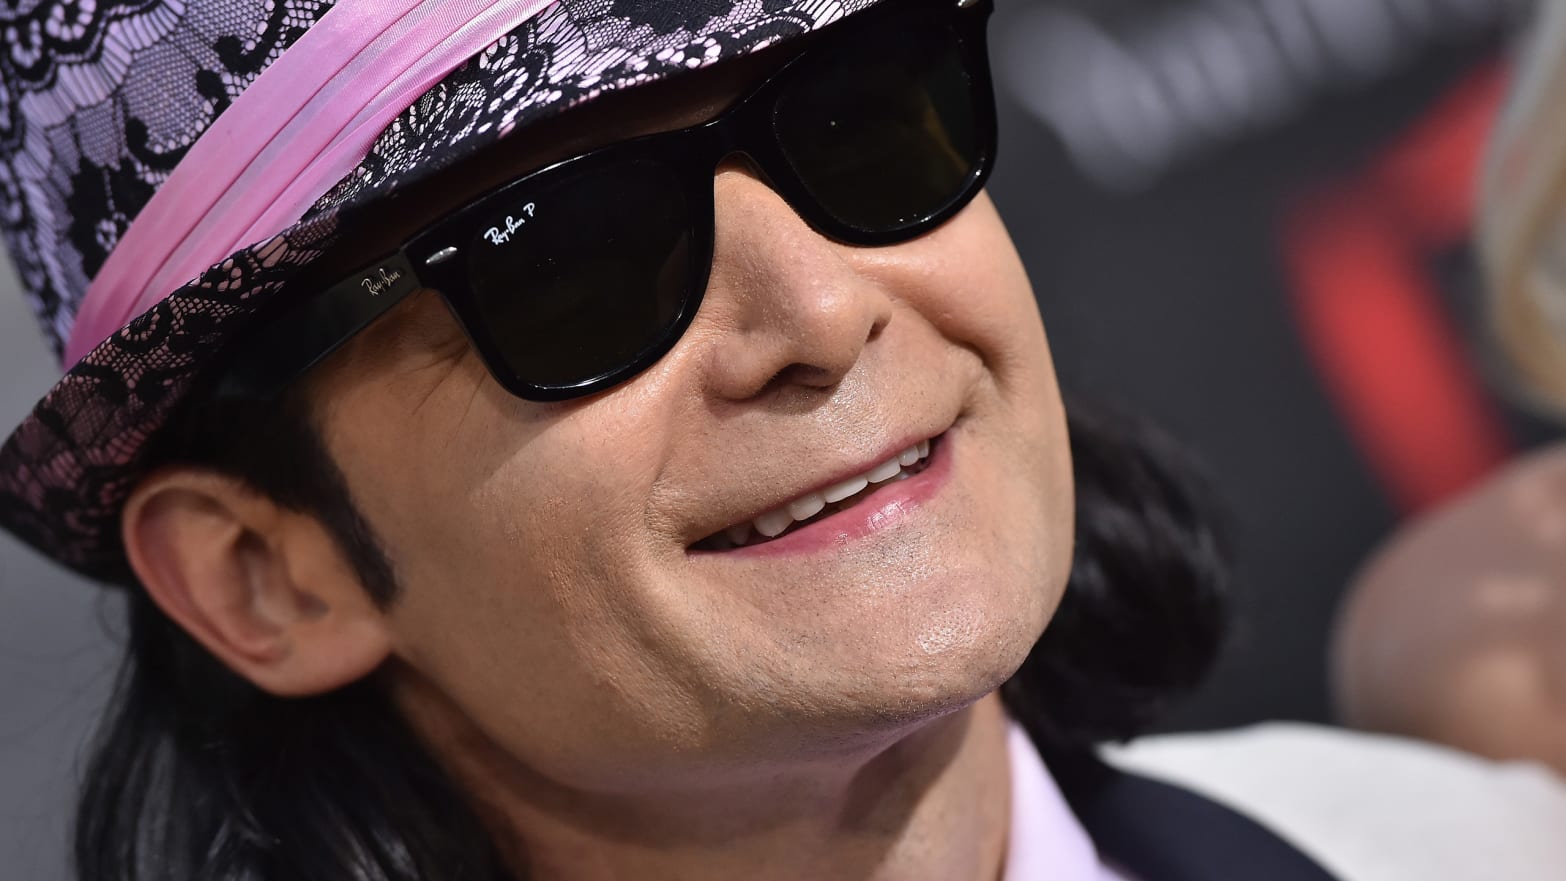 Corey Feldman Does Not Need $10 Million to Name His Hollywood Abusers pic